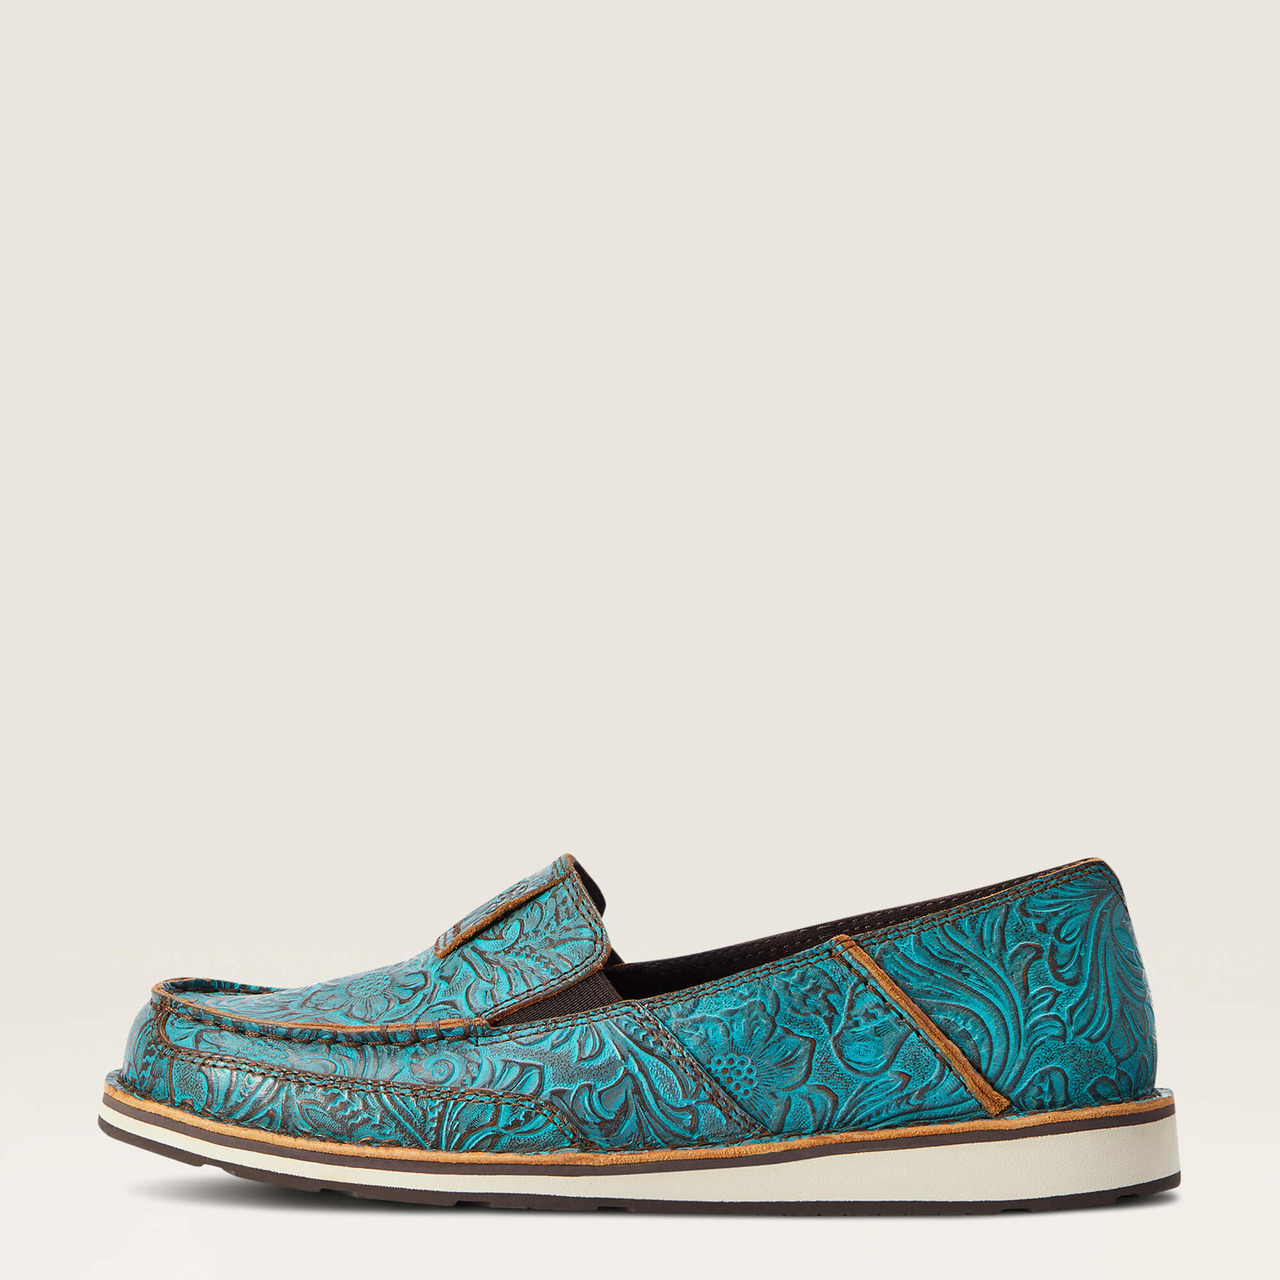 **Ariat Womens Cruiser Shoes - Brushed Turquoise Floral Embossed